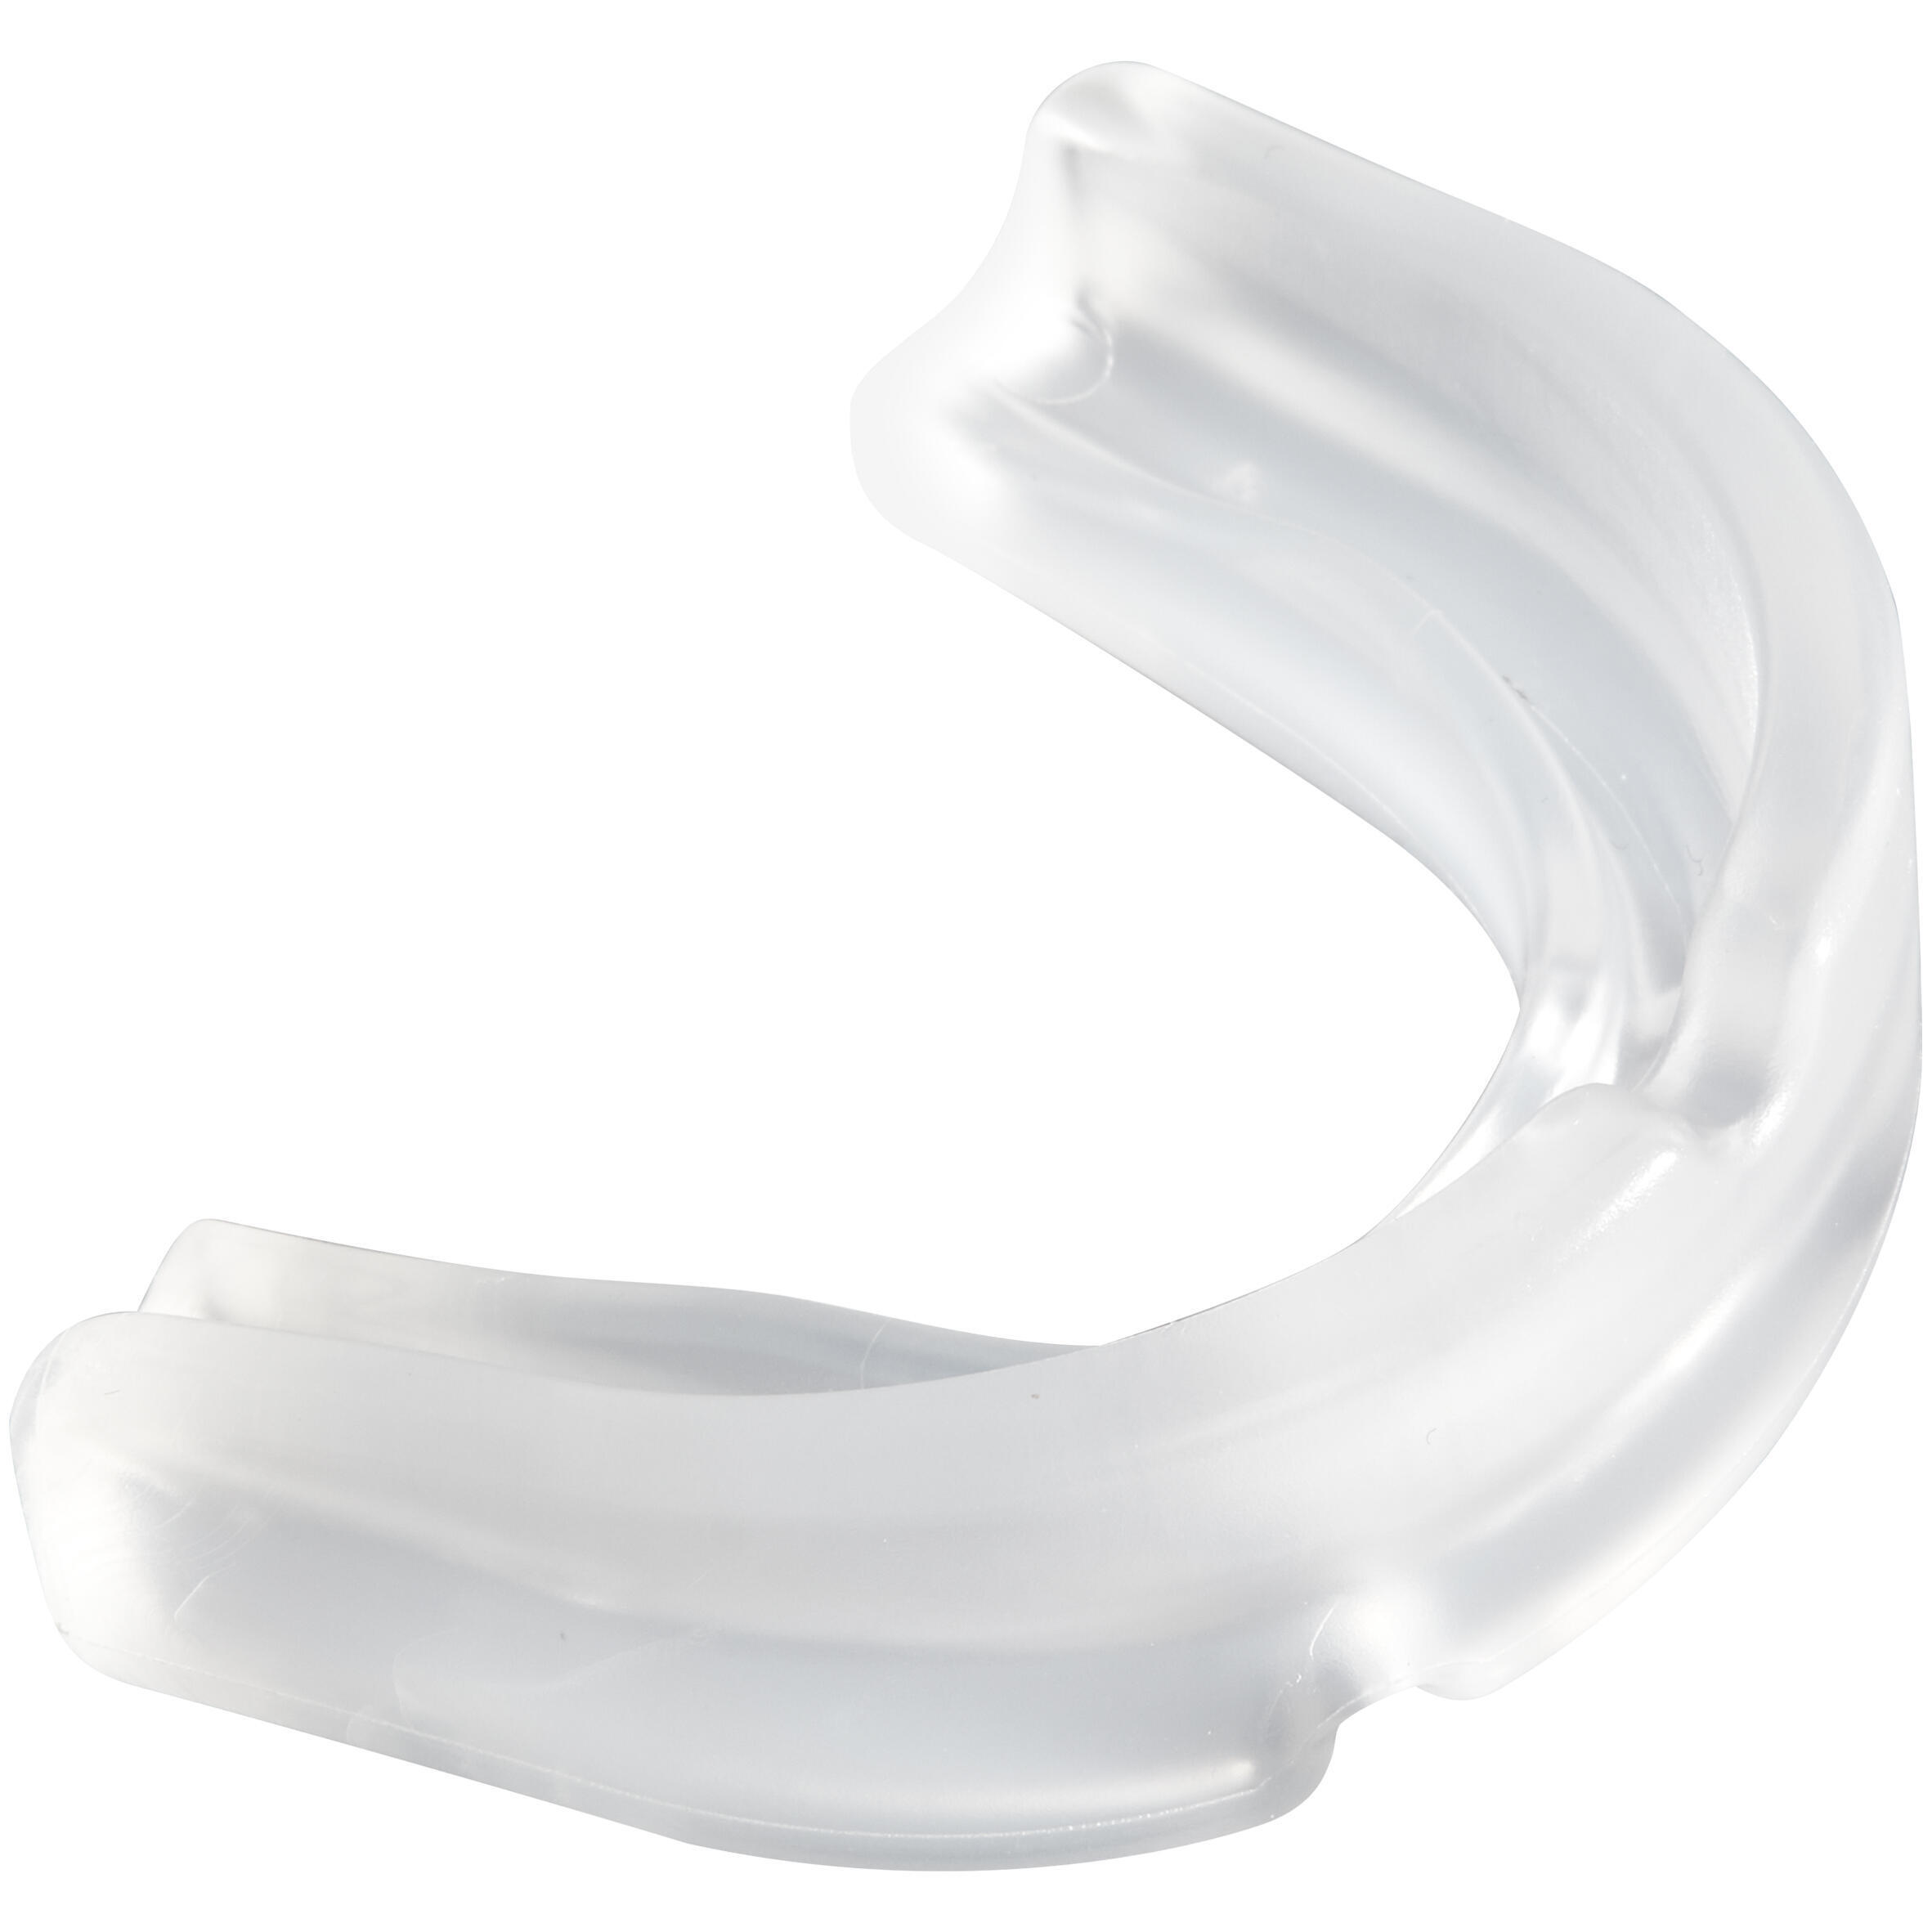 OFFLOAD Refurbished Size M Transparent Rugby Mouthguard R100 - A Grade